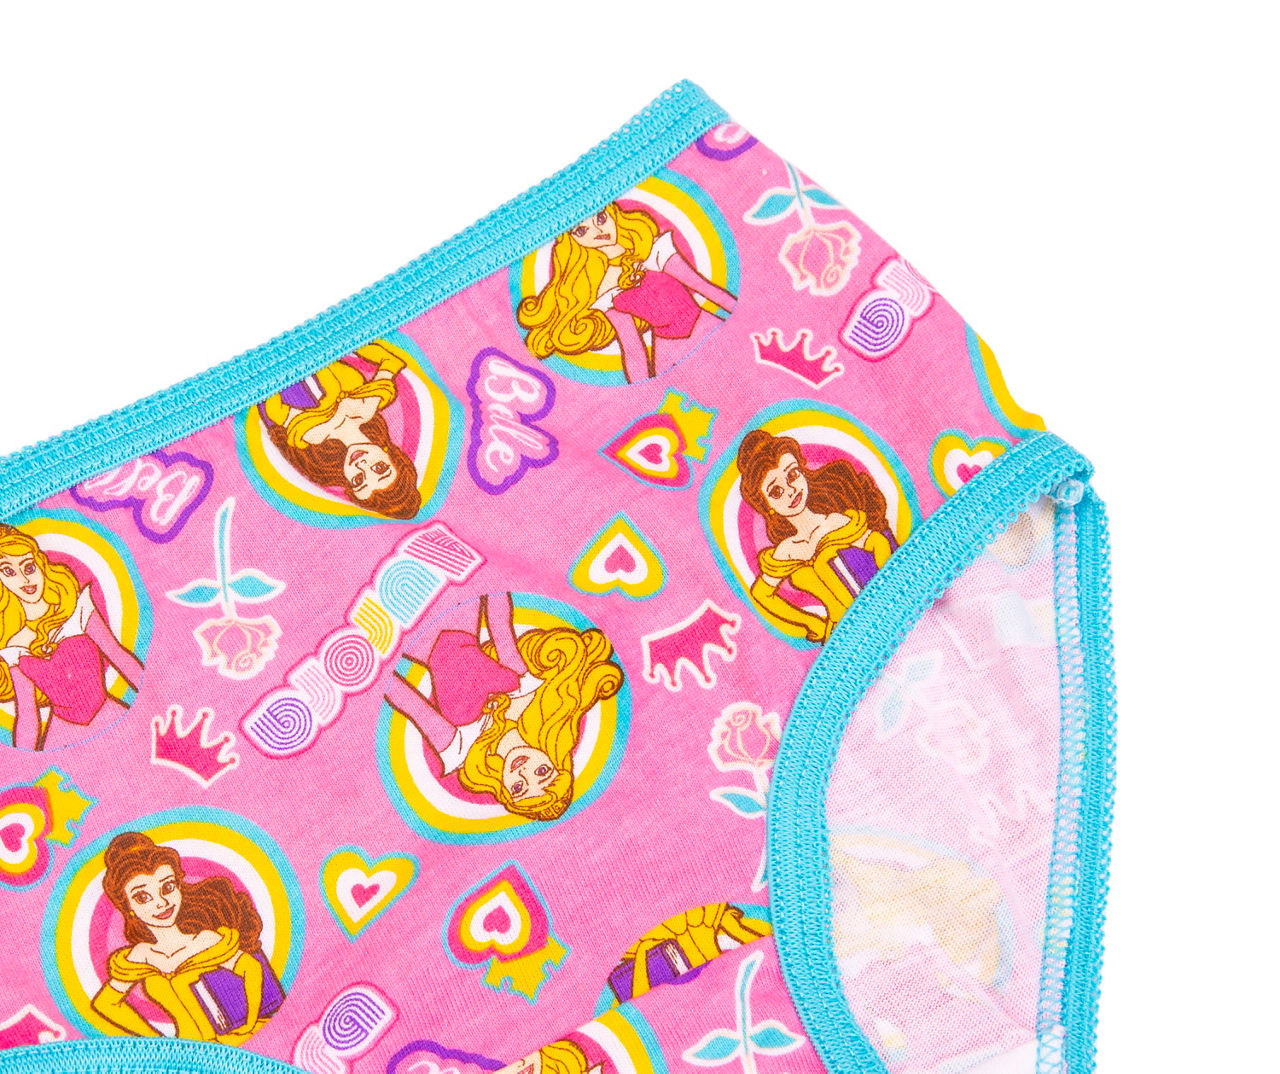 Buy Multi Brights 5 Pack Disney™ Princess Briefs (1.5-8yrs) from Next South  Africa